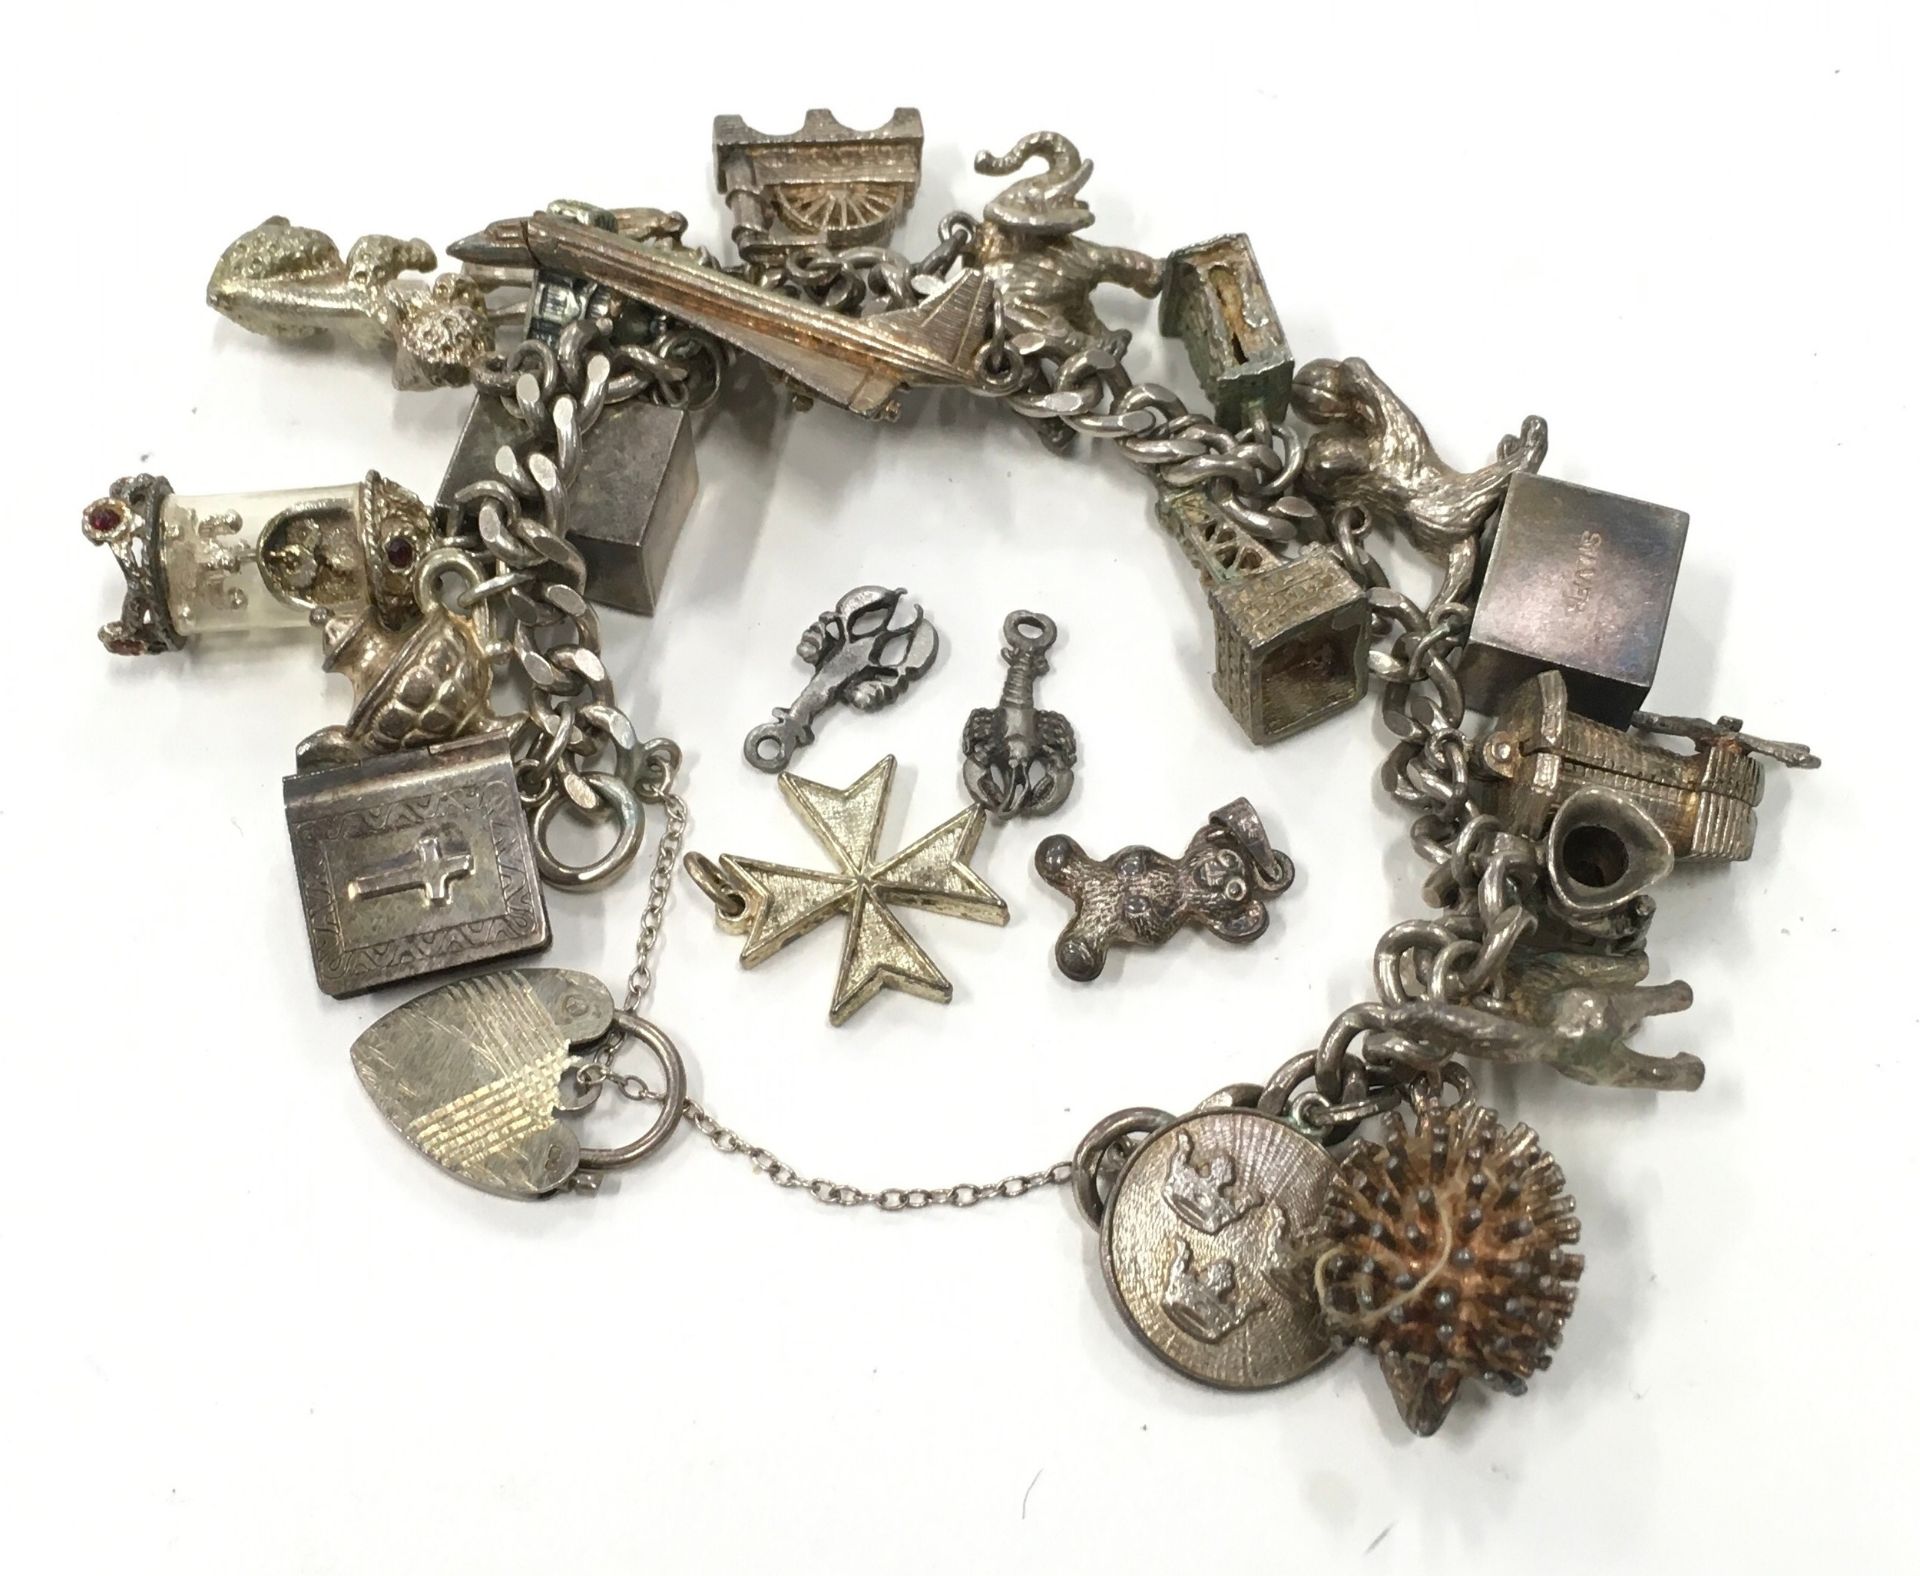 Silver charm bracelet with a large collection of charms.